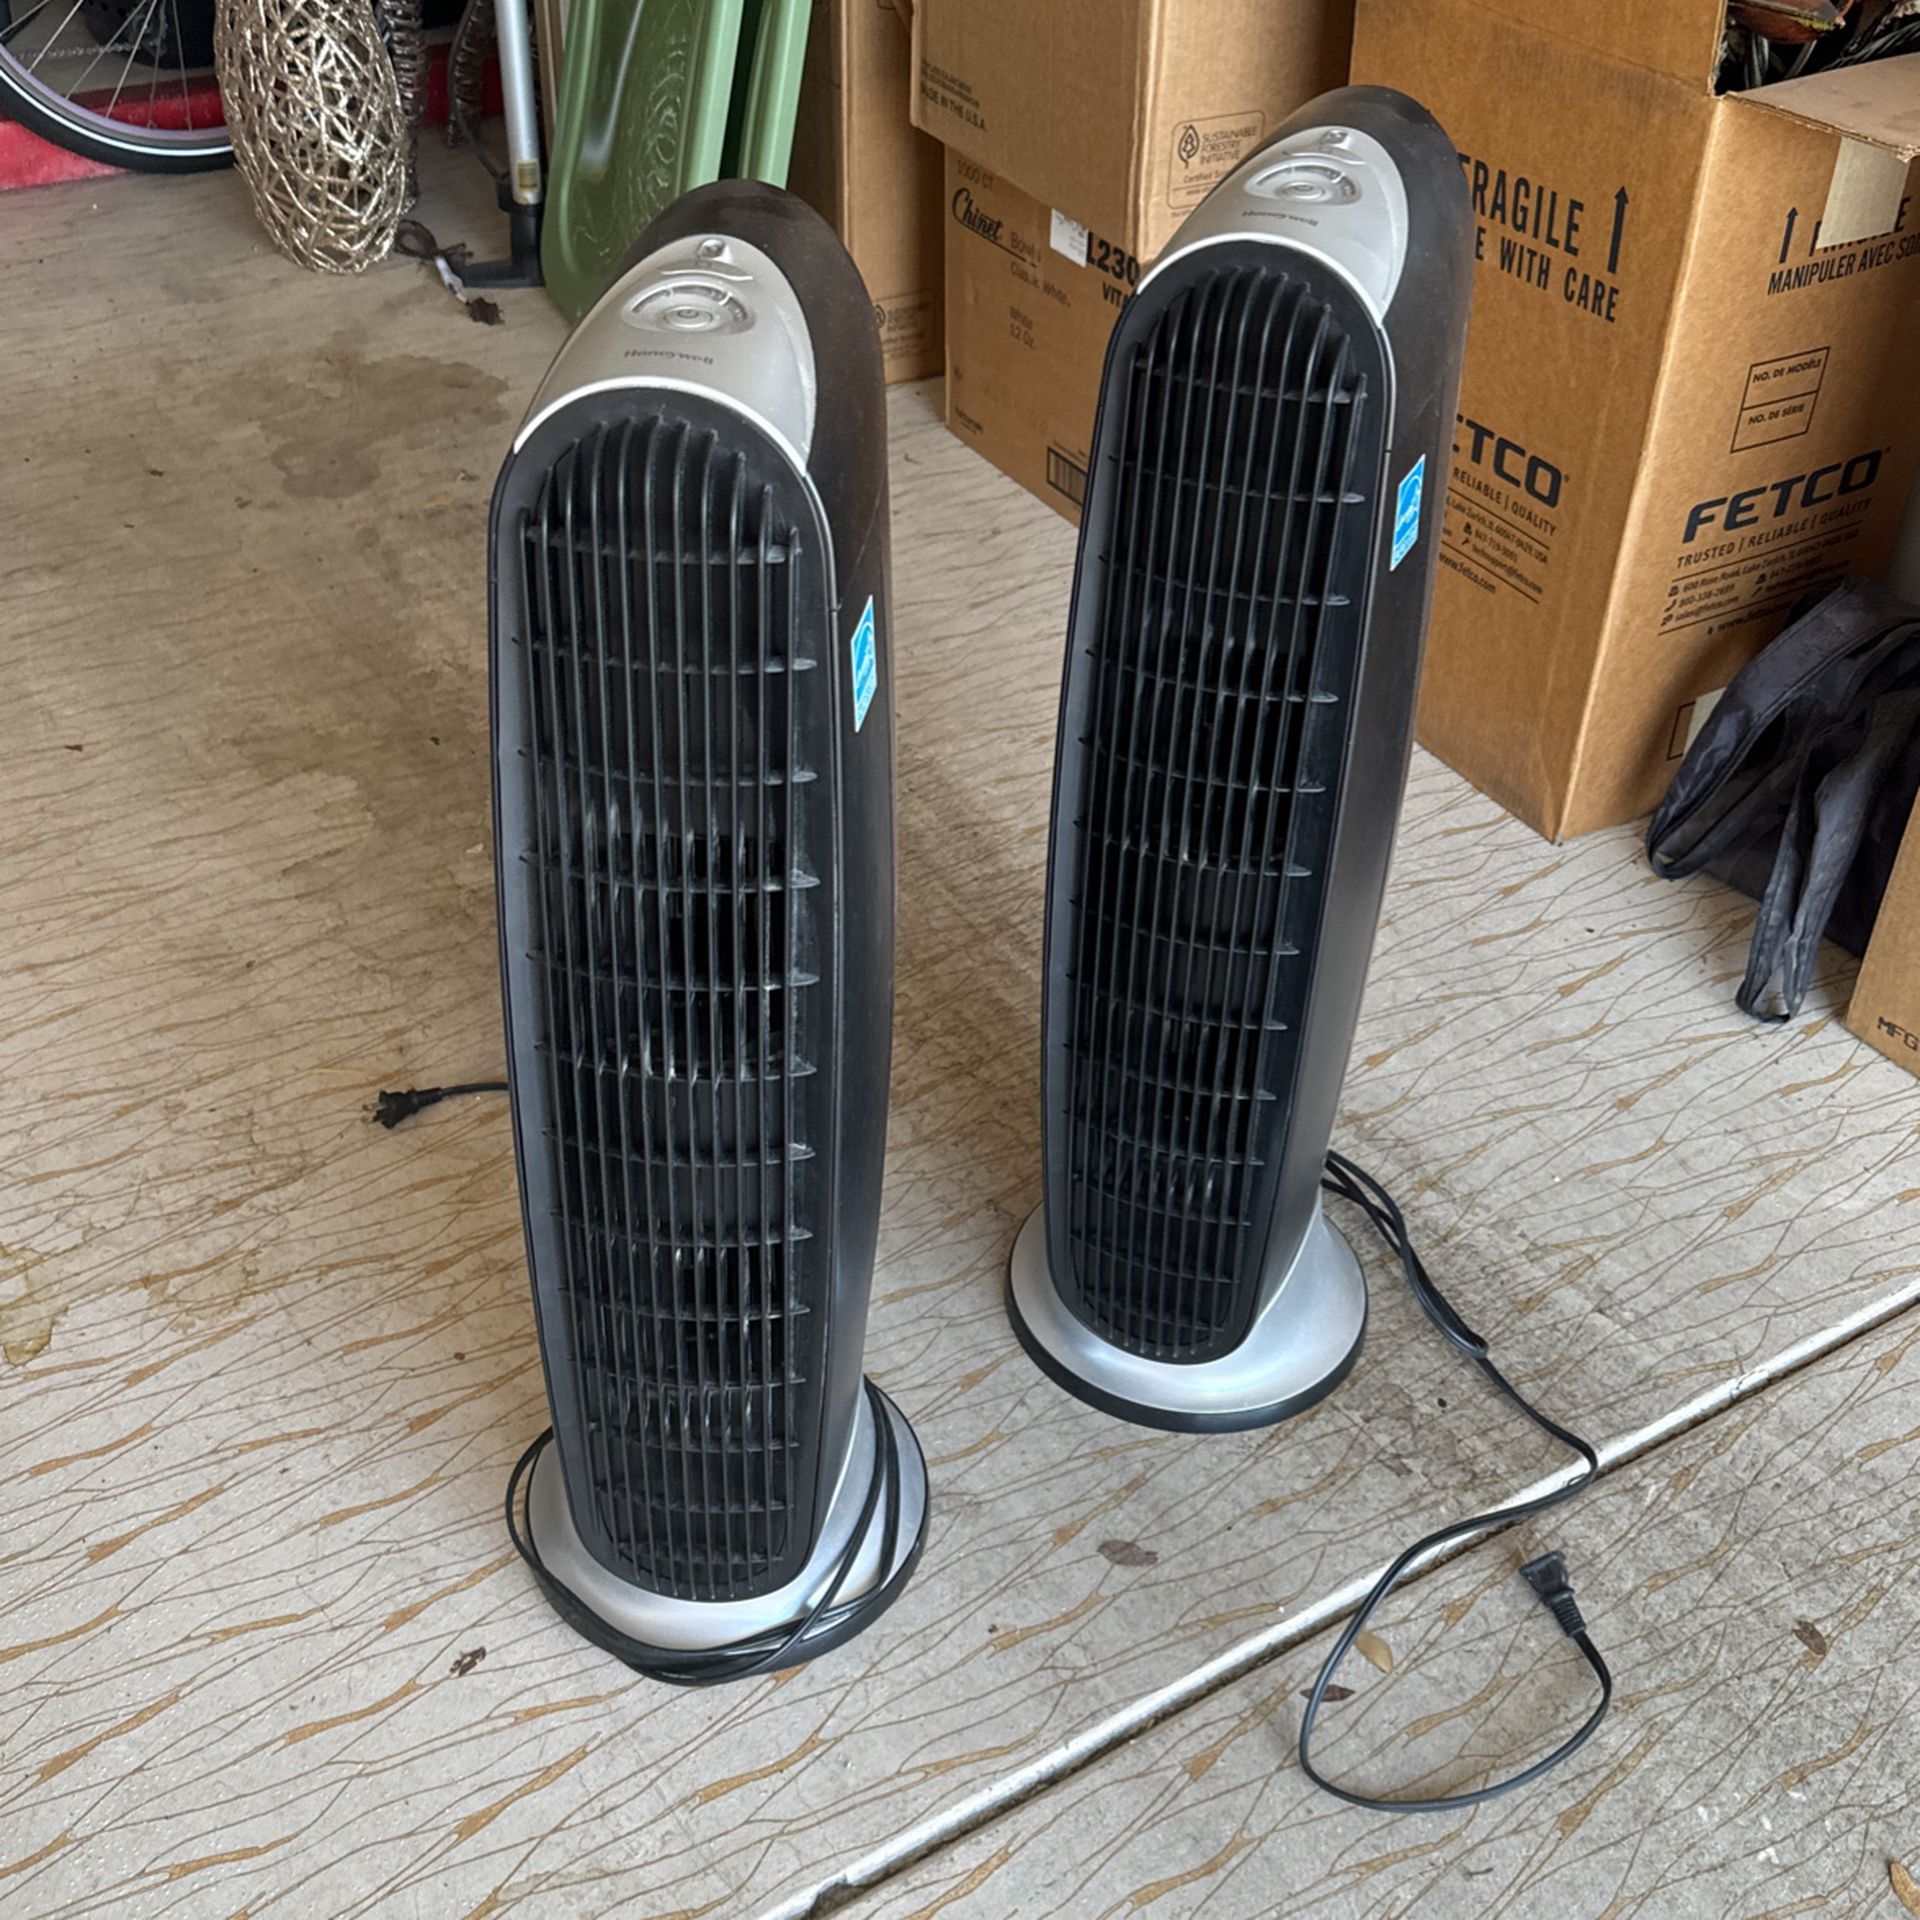 2 Honeywell Portable Air Filters, Like New